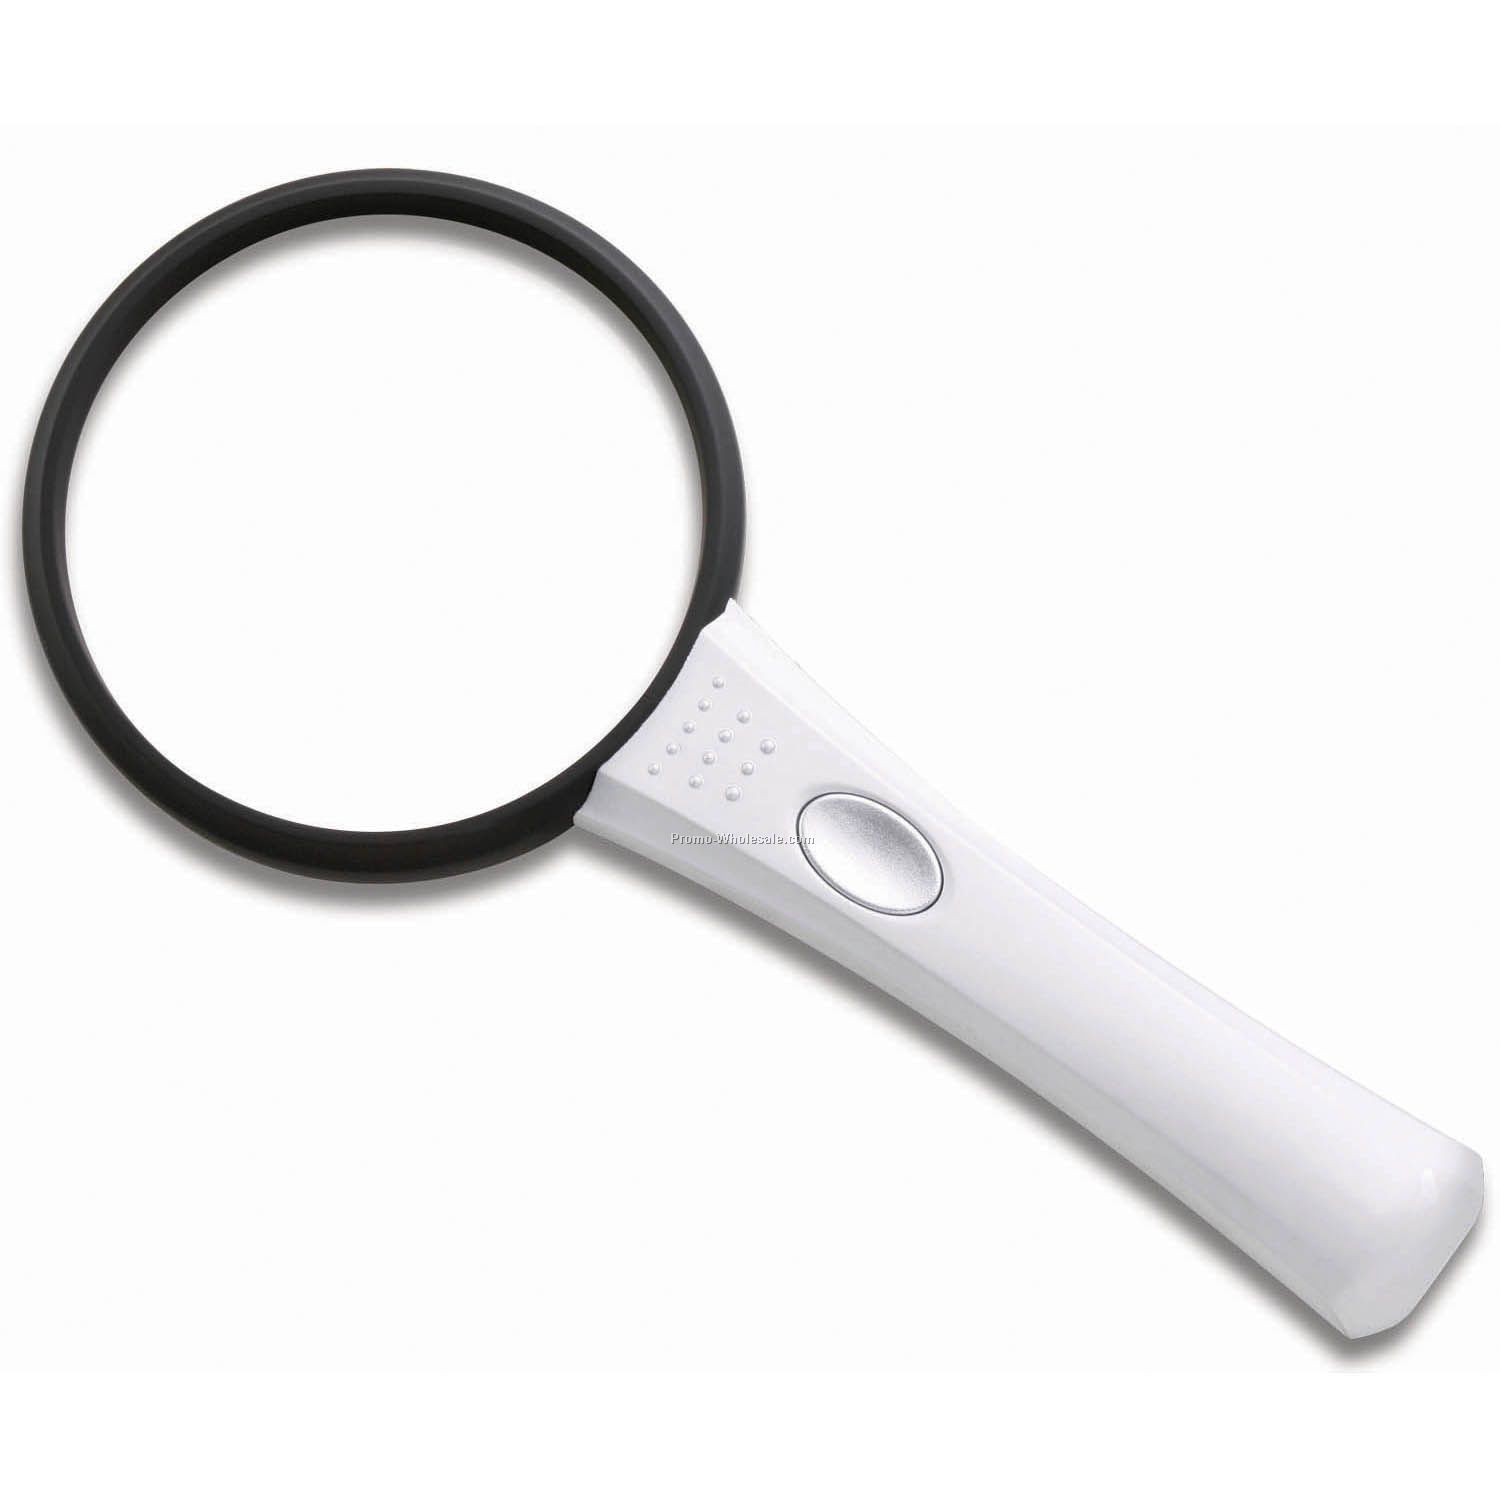 4x Pocket Magnifier With Built In LED Light